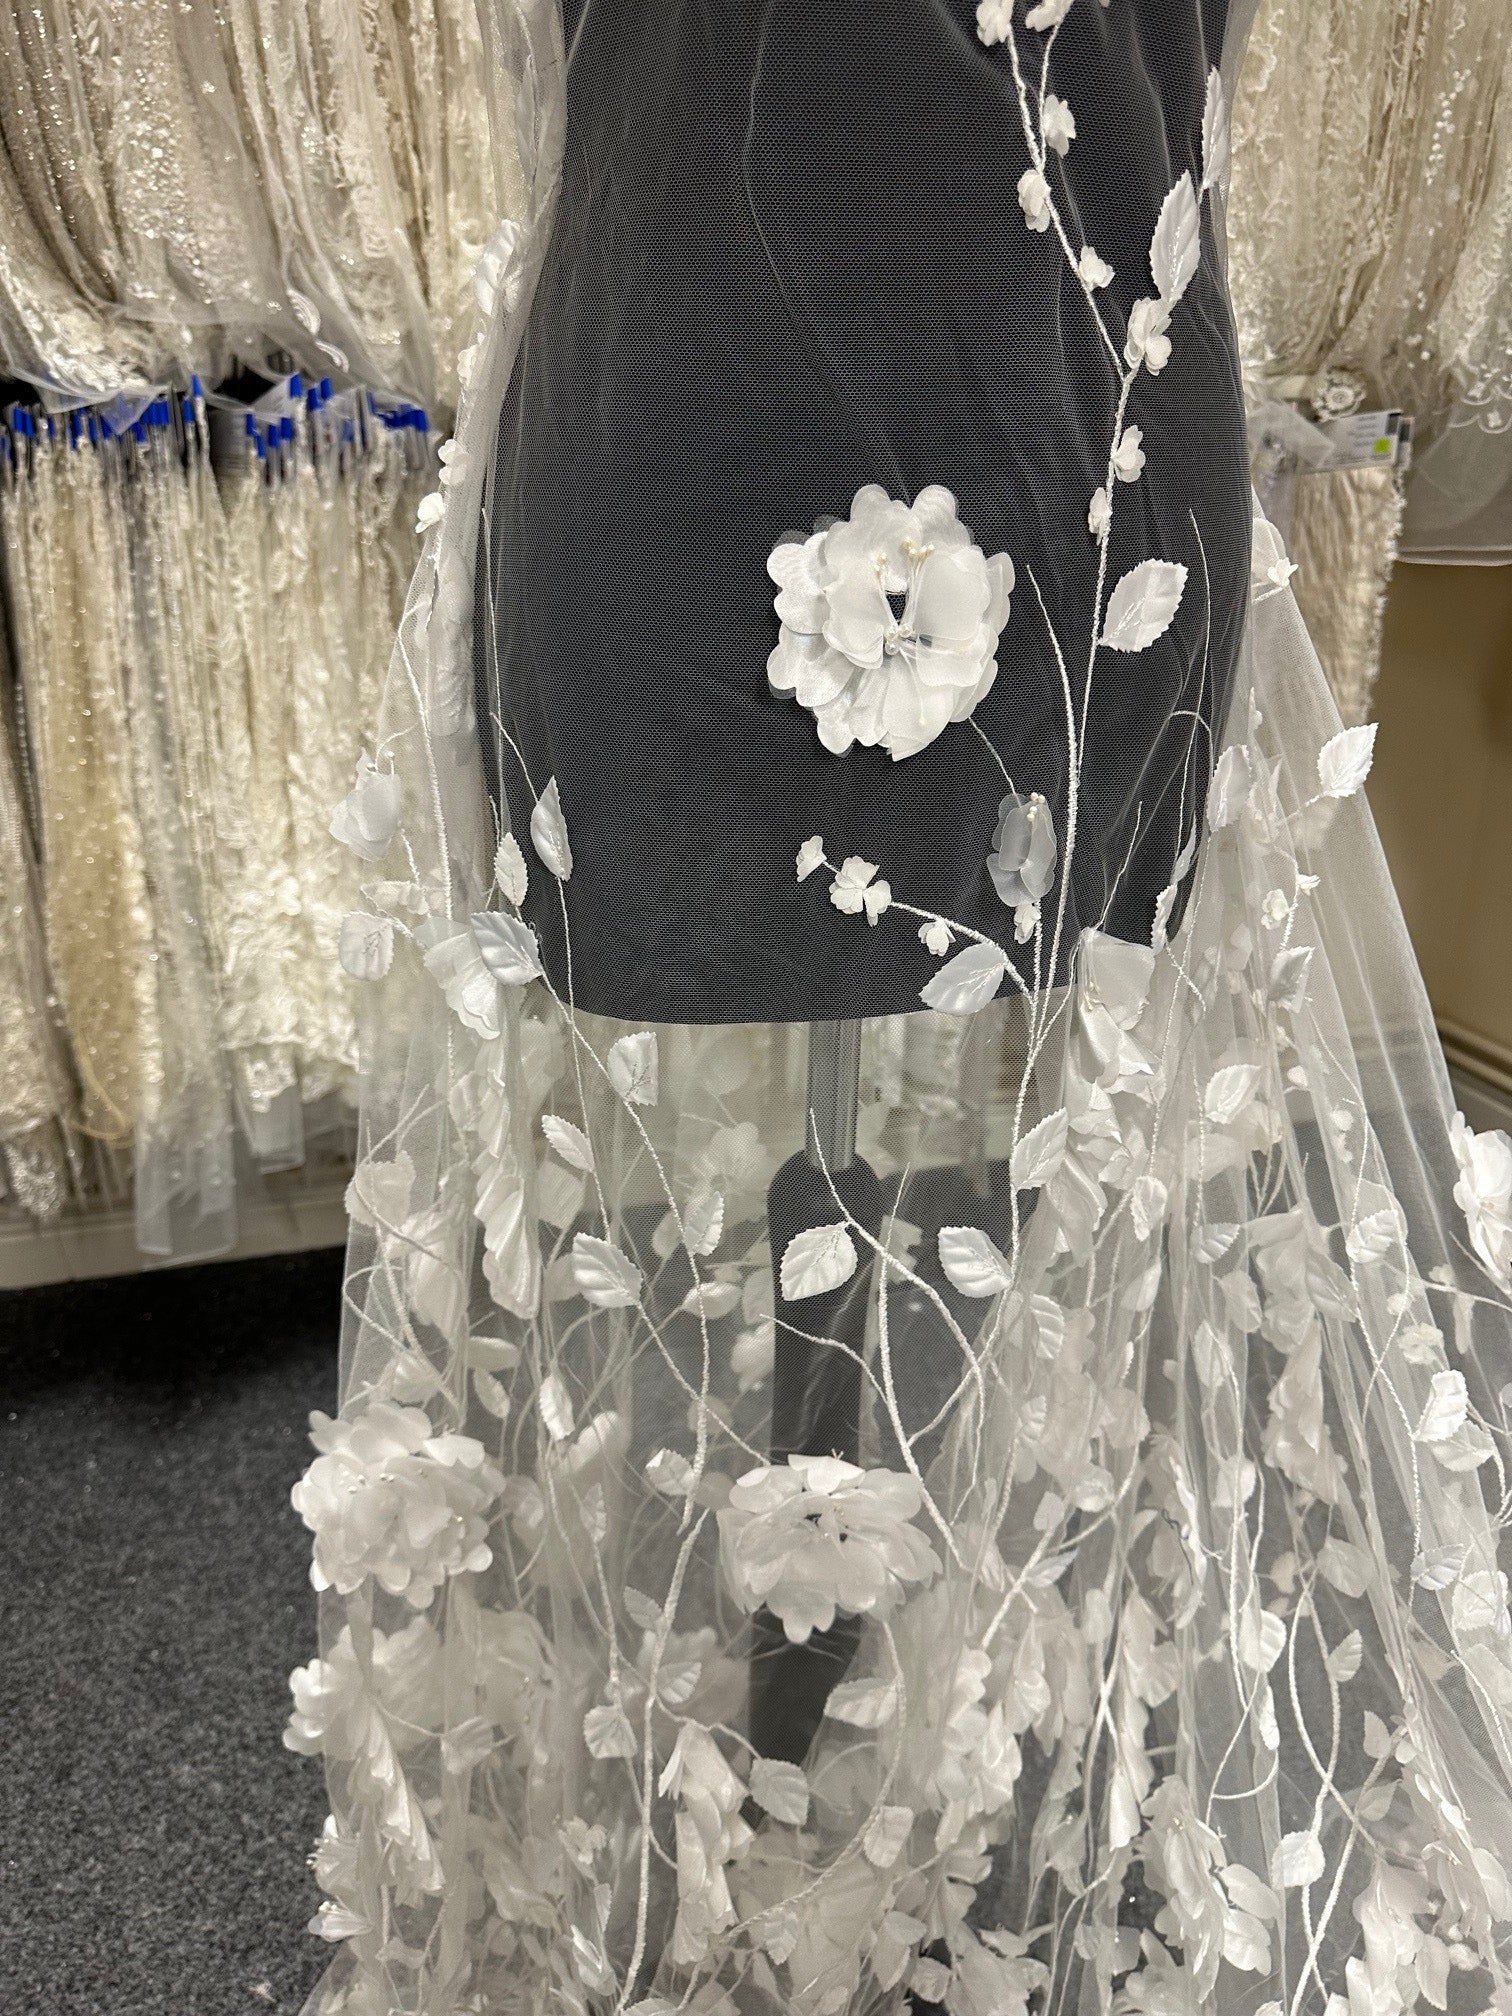 Off-white Net Fabric With White Embroidery, Boho Floral Fabric